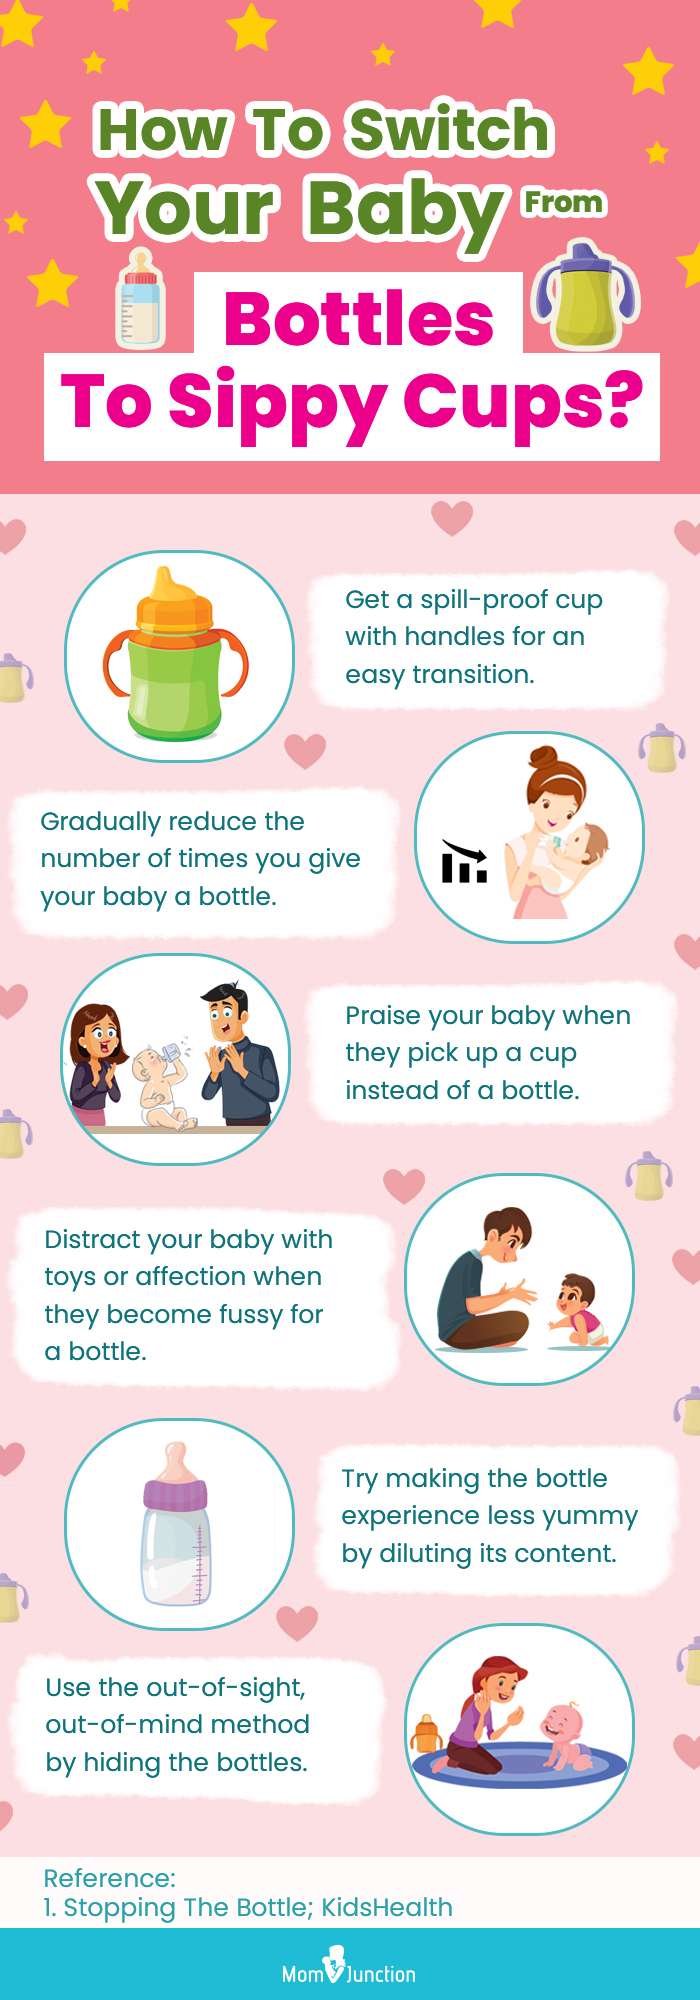 How to Switch Your Baby From Bottles To Sippy Cups